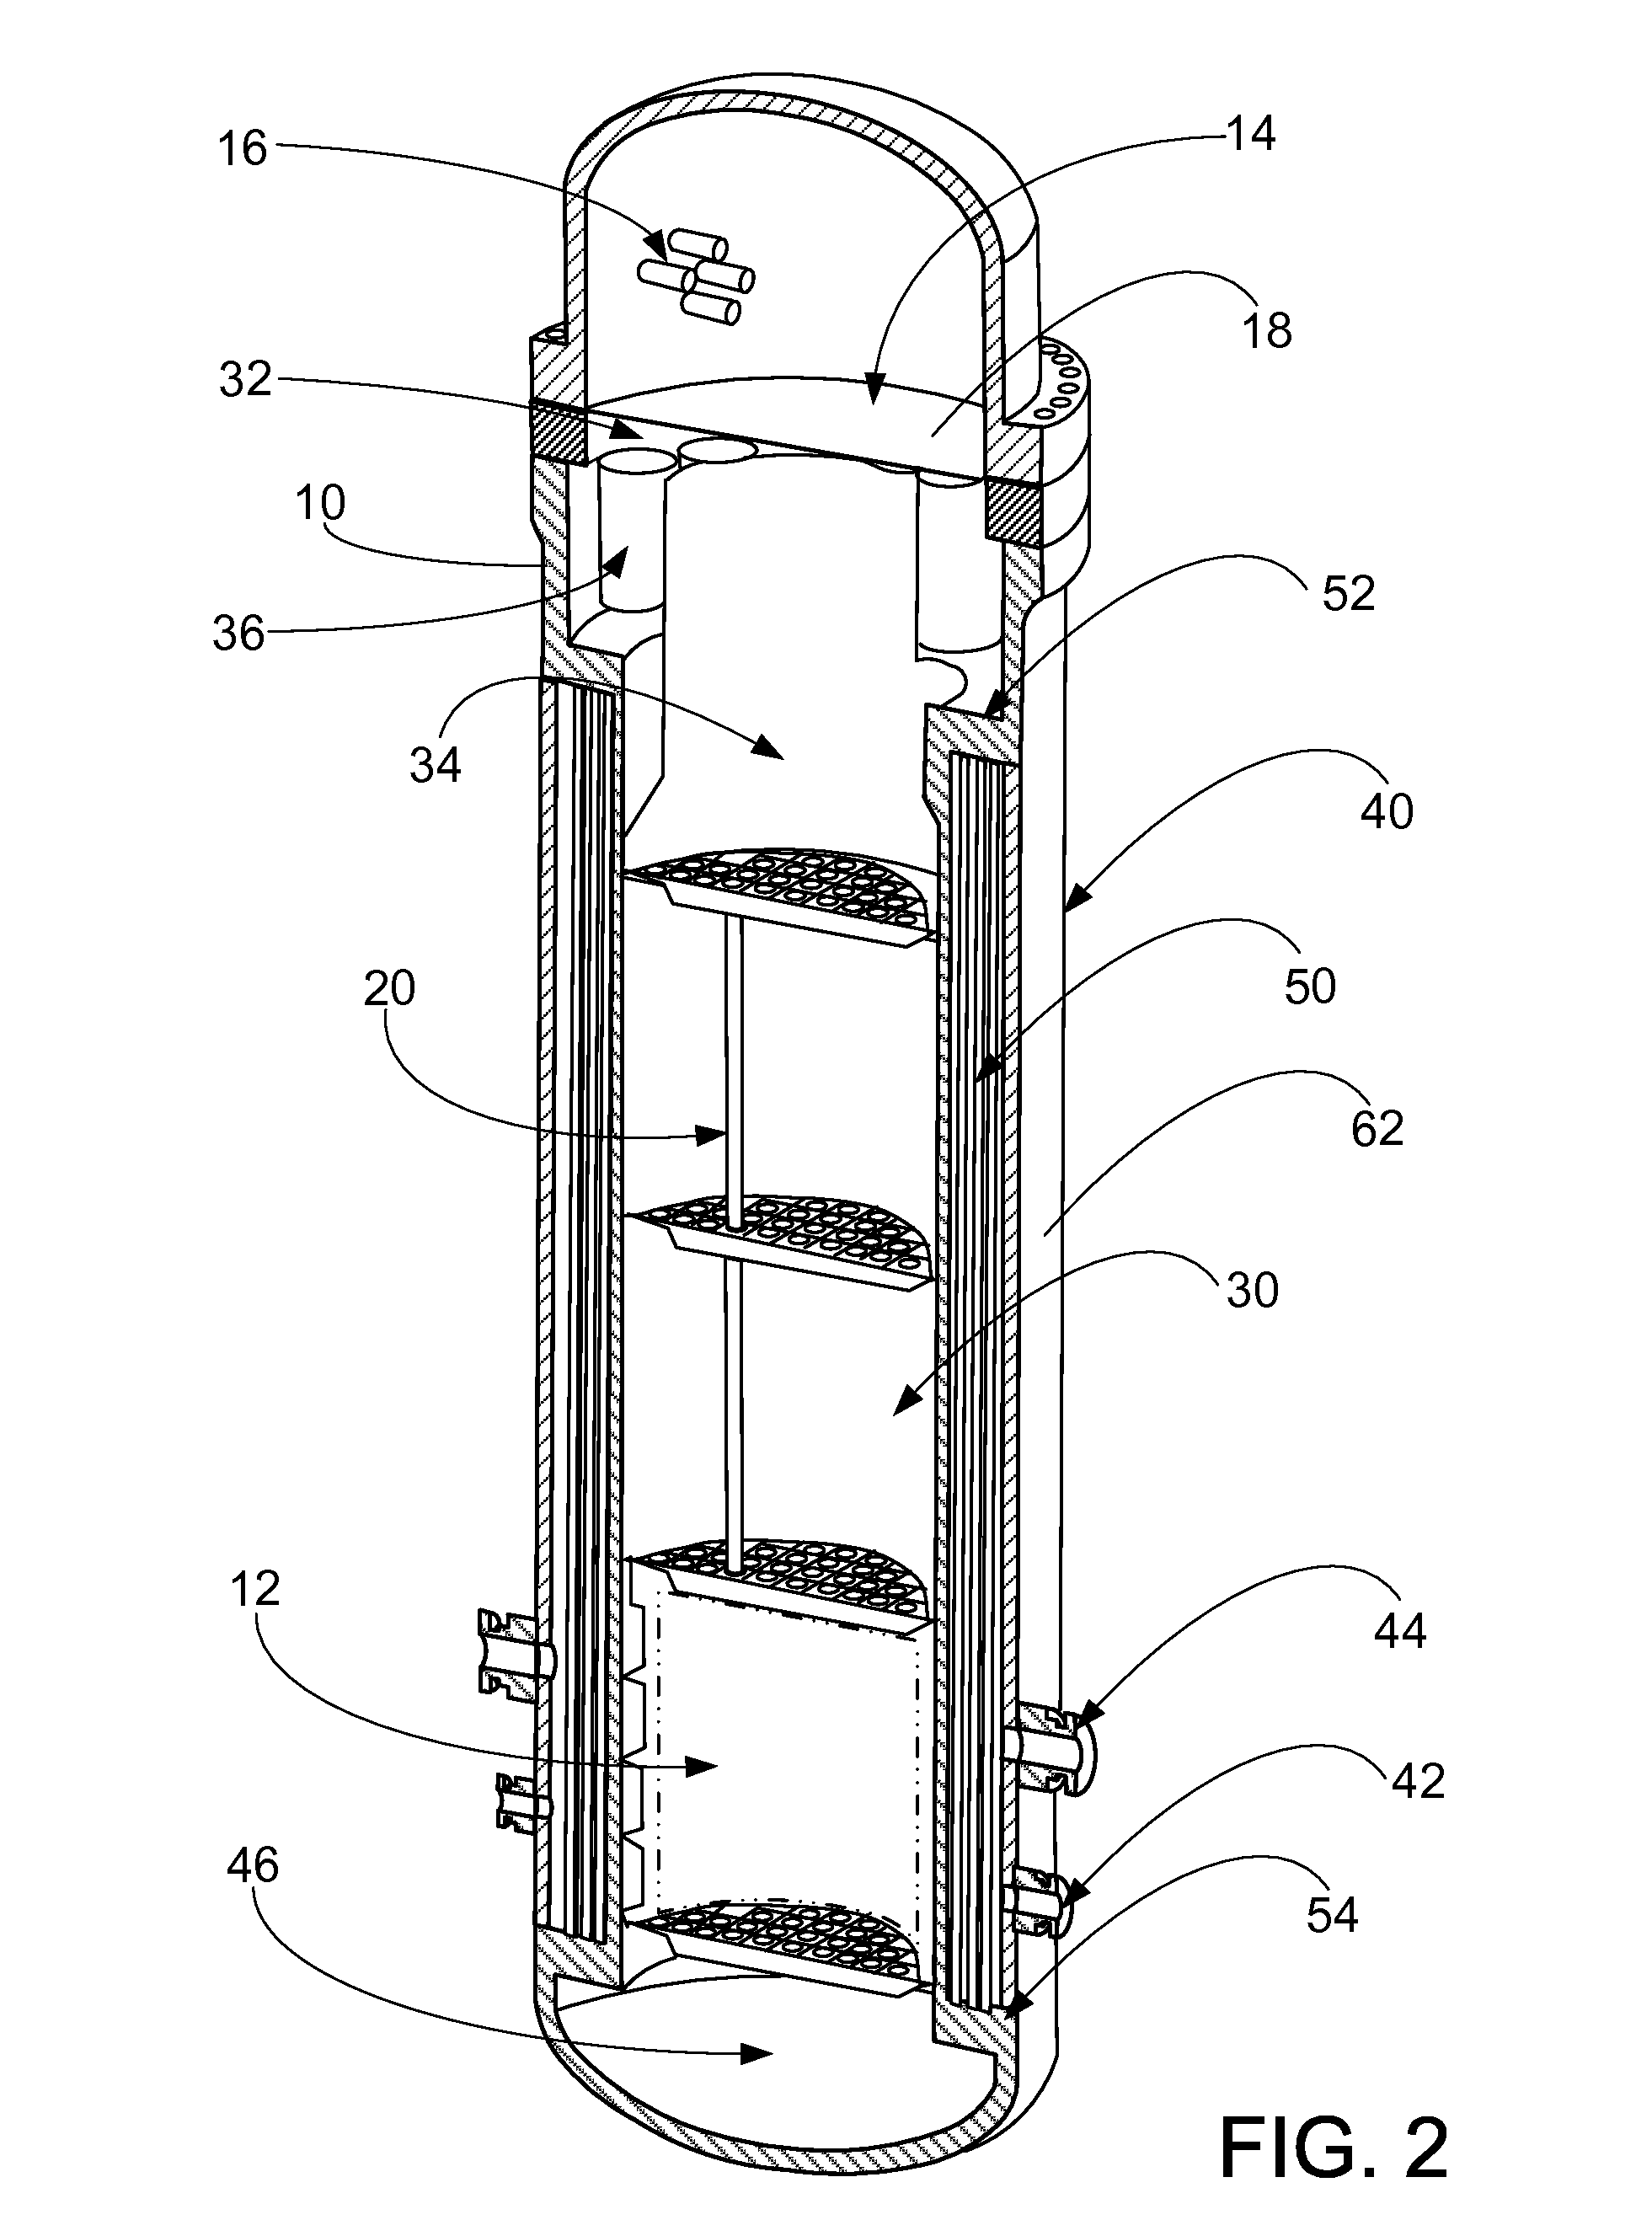 Compact integral pressurized water nuclear reactor